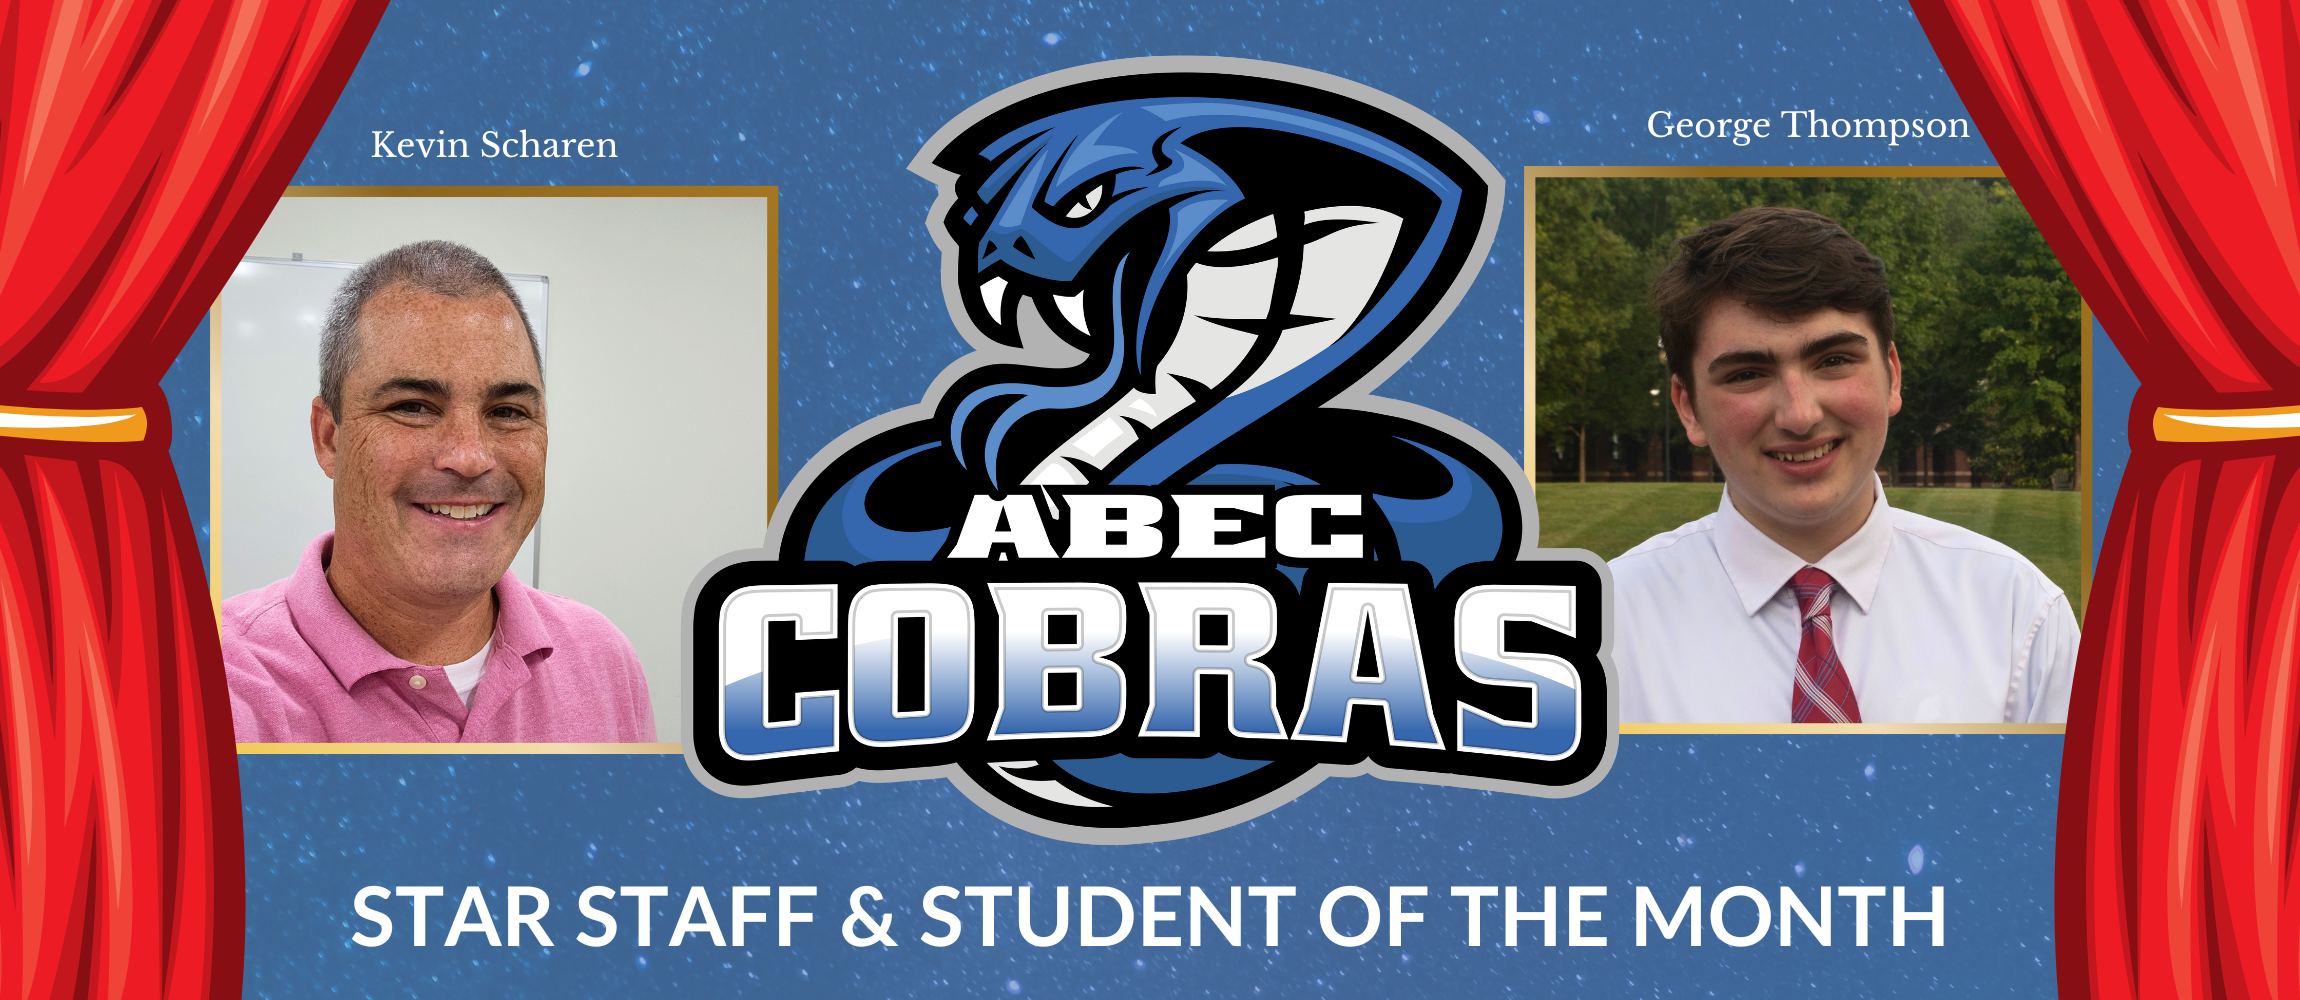 ABEC Cobras STAR Staff & Student of the Month highlight banner